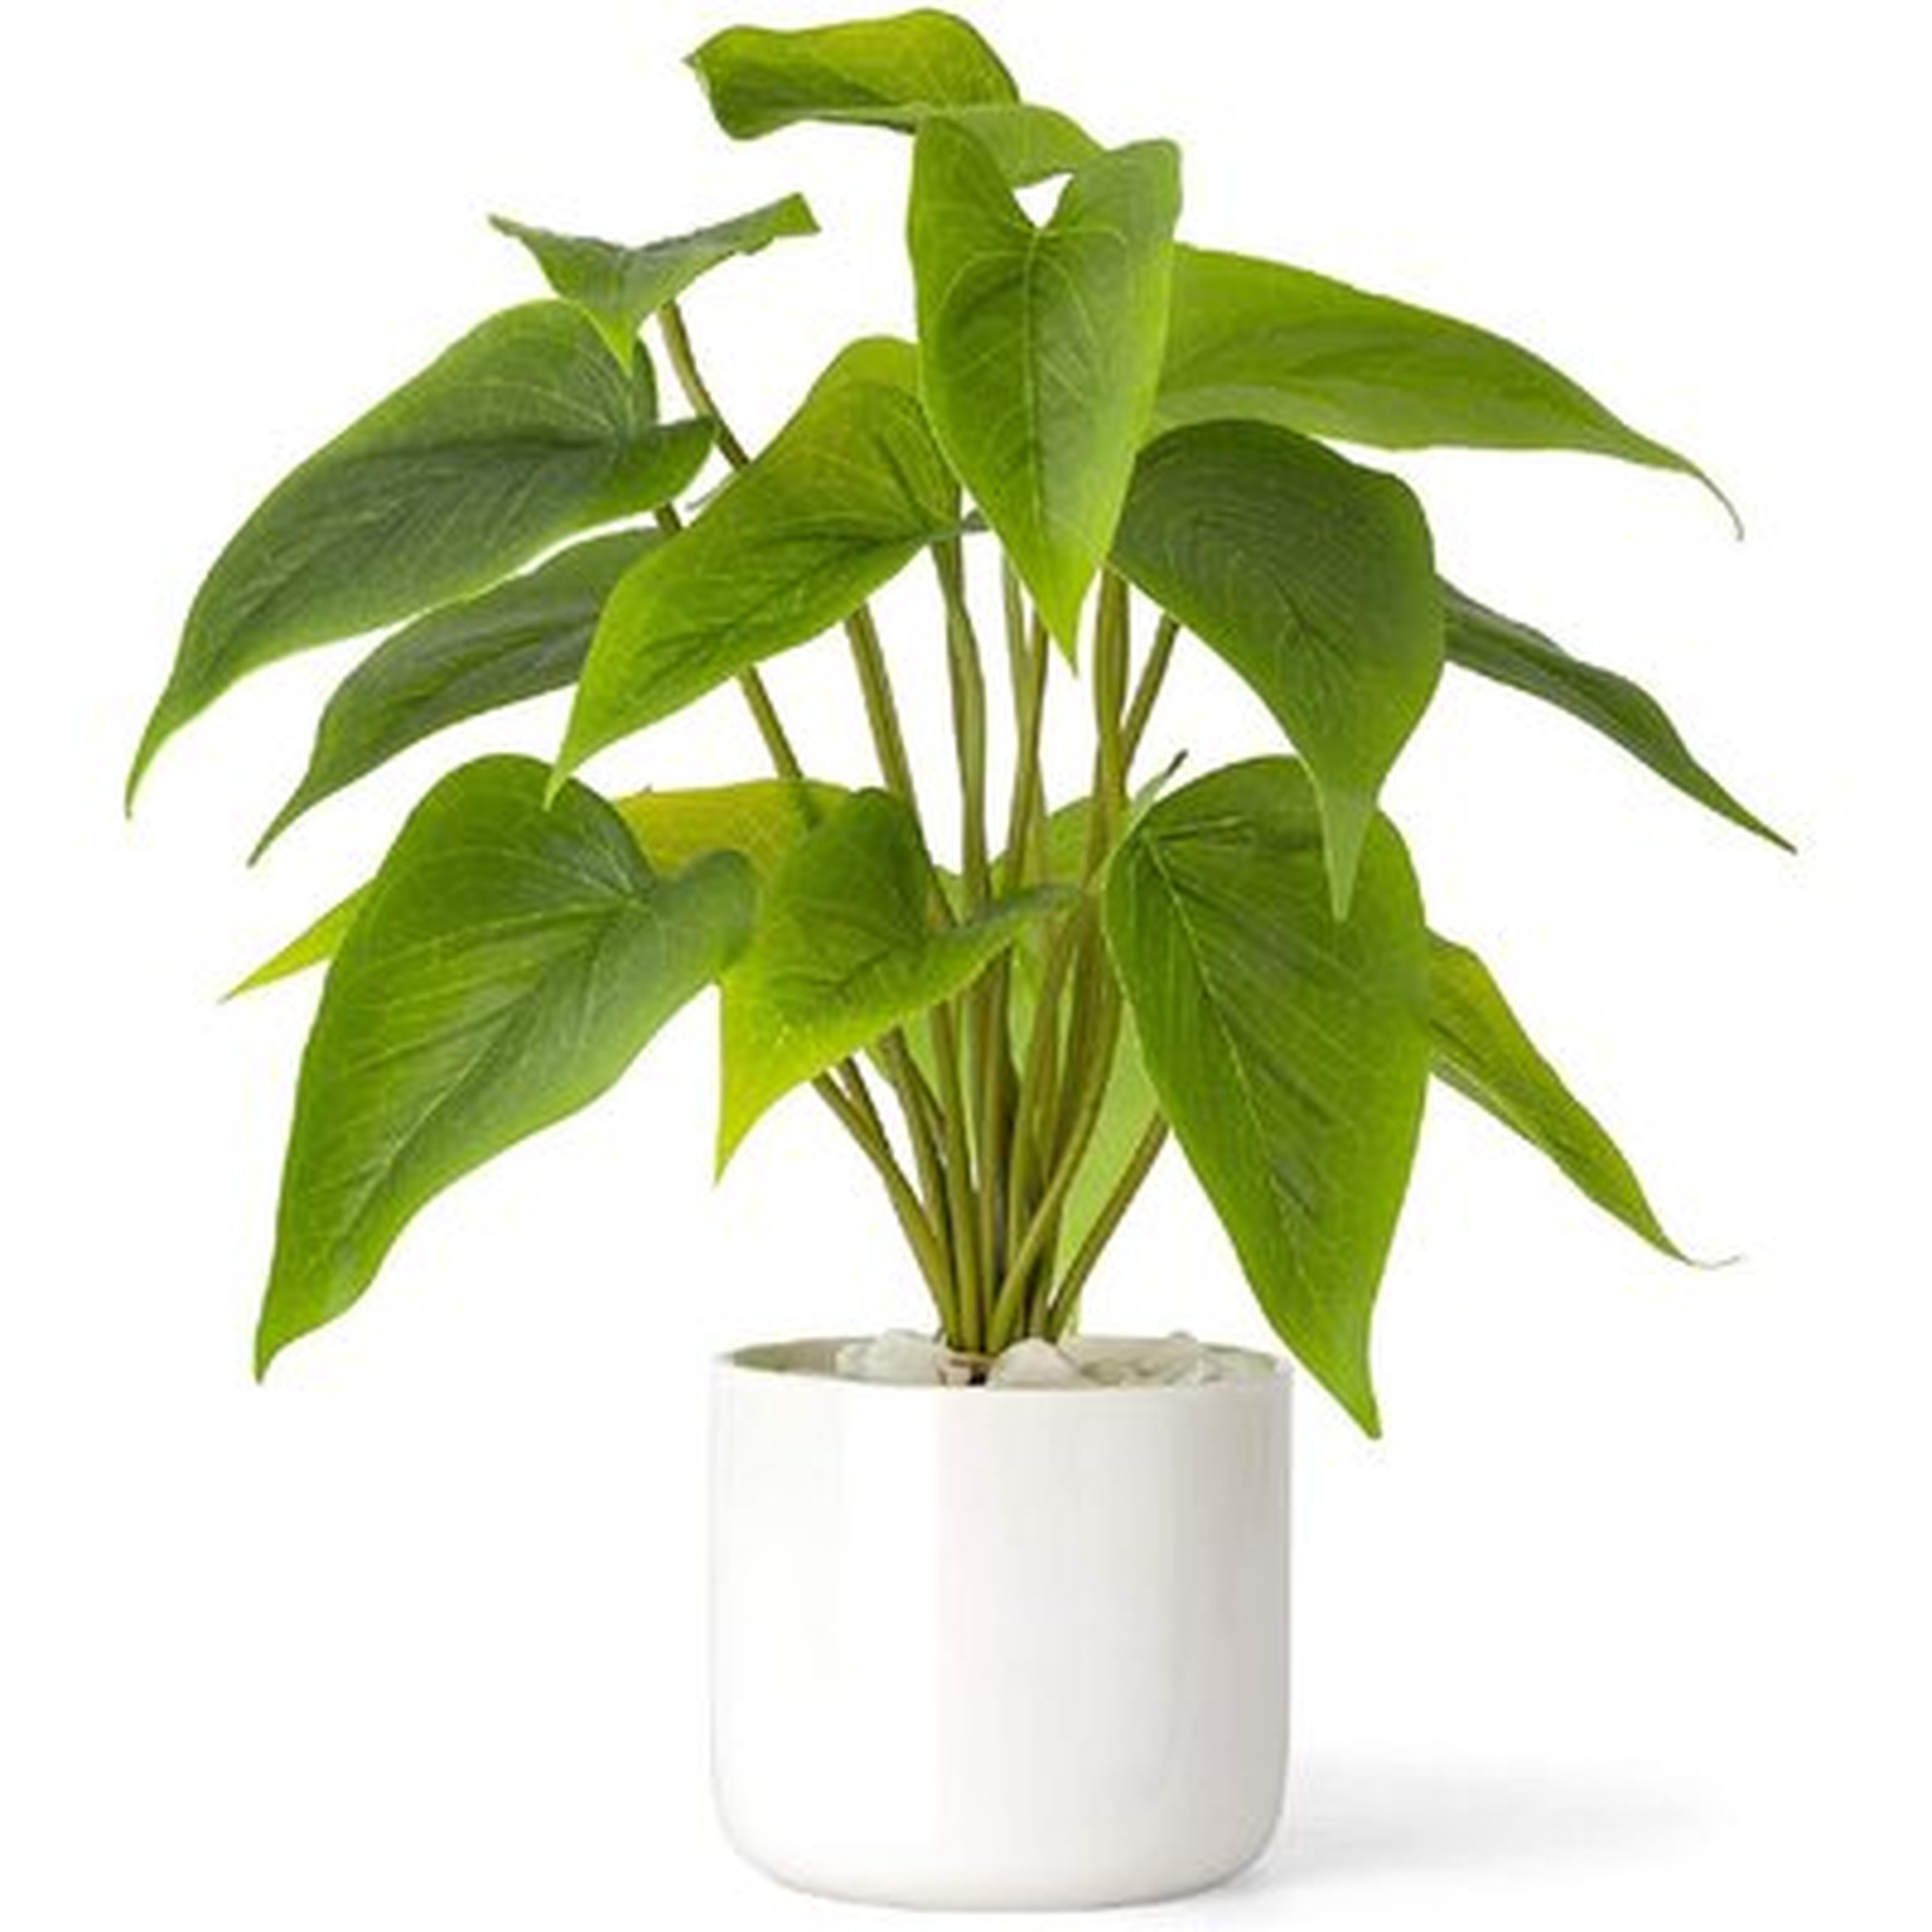 Fake Plants In Ceramic Pot, 11" Potted Artificial Plants For Home Decor Indoor Faux Green Leaf Plant With Modern White Planter For Desk Shelf Office Room Decoration - Wayfair